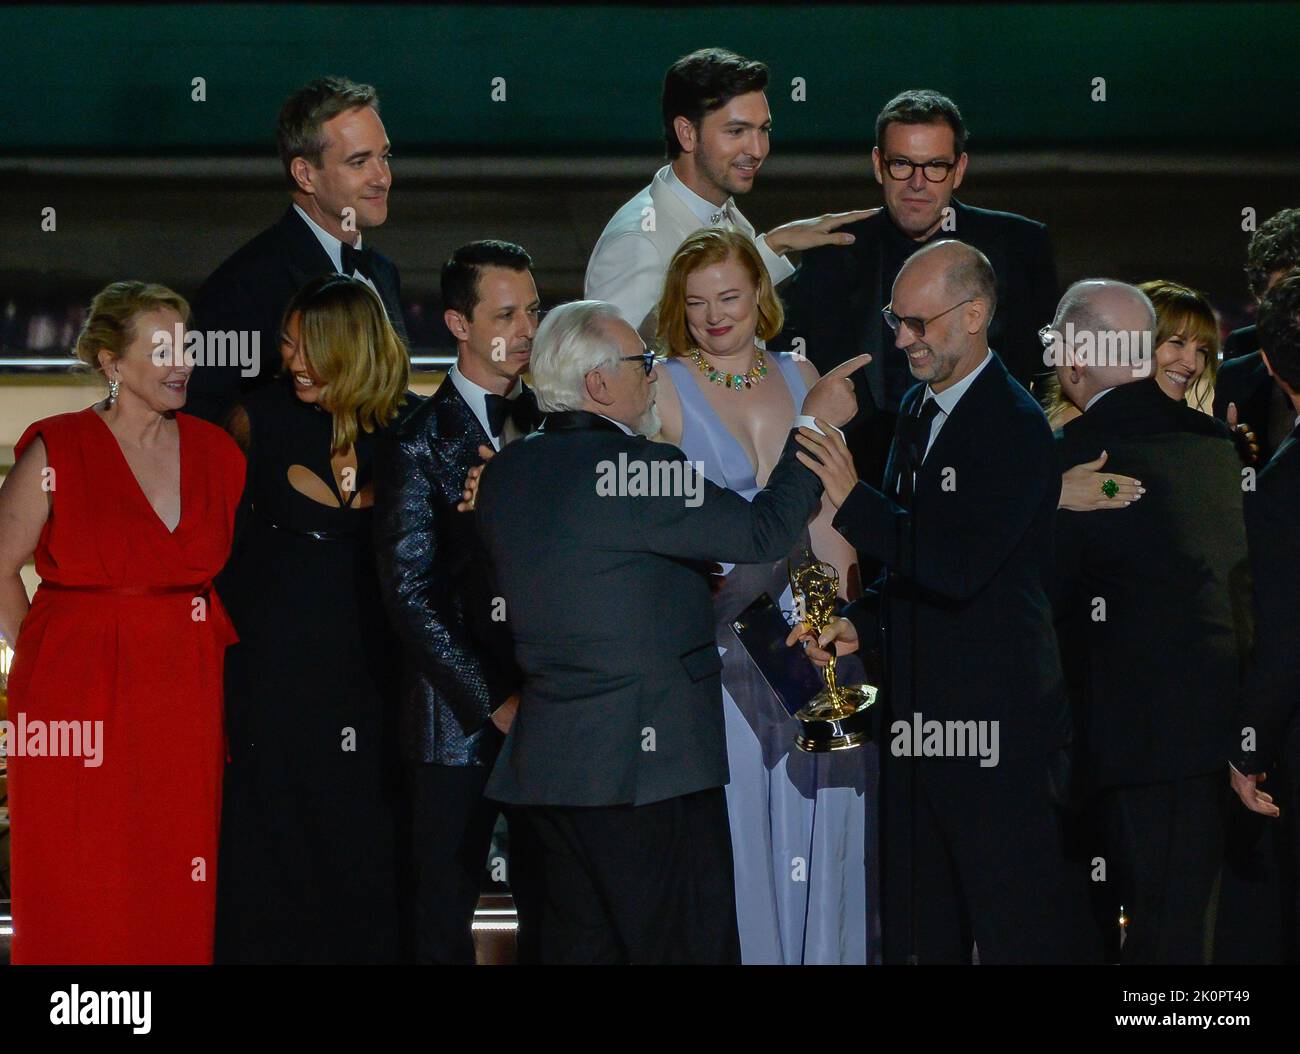 Los Angeles, United States. 12th Sep, 2022. Jesse Armstrong with cast and crew accept the Outstanding Drama Series award for 'Succession' onstage during the 74th annual Primetime Emmy Awards at the Microsoft Theater in Los Angeles on Monday, September 12, 2022. Photo by Mike Goulding/UPI Credit: UPI/Alamy Live News Credit: UPI/Alamy Live News Credit: UPI/Alamy Live News Stock Photo